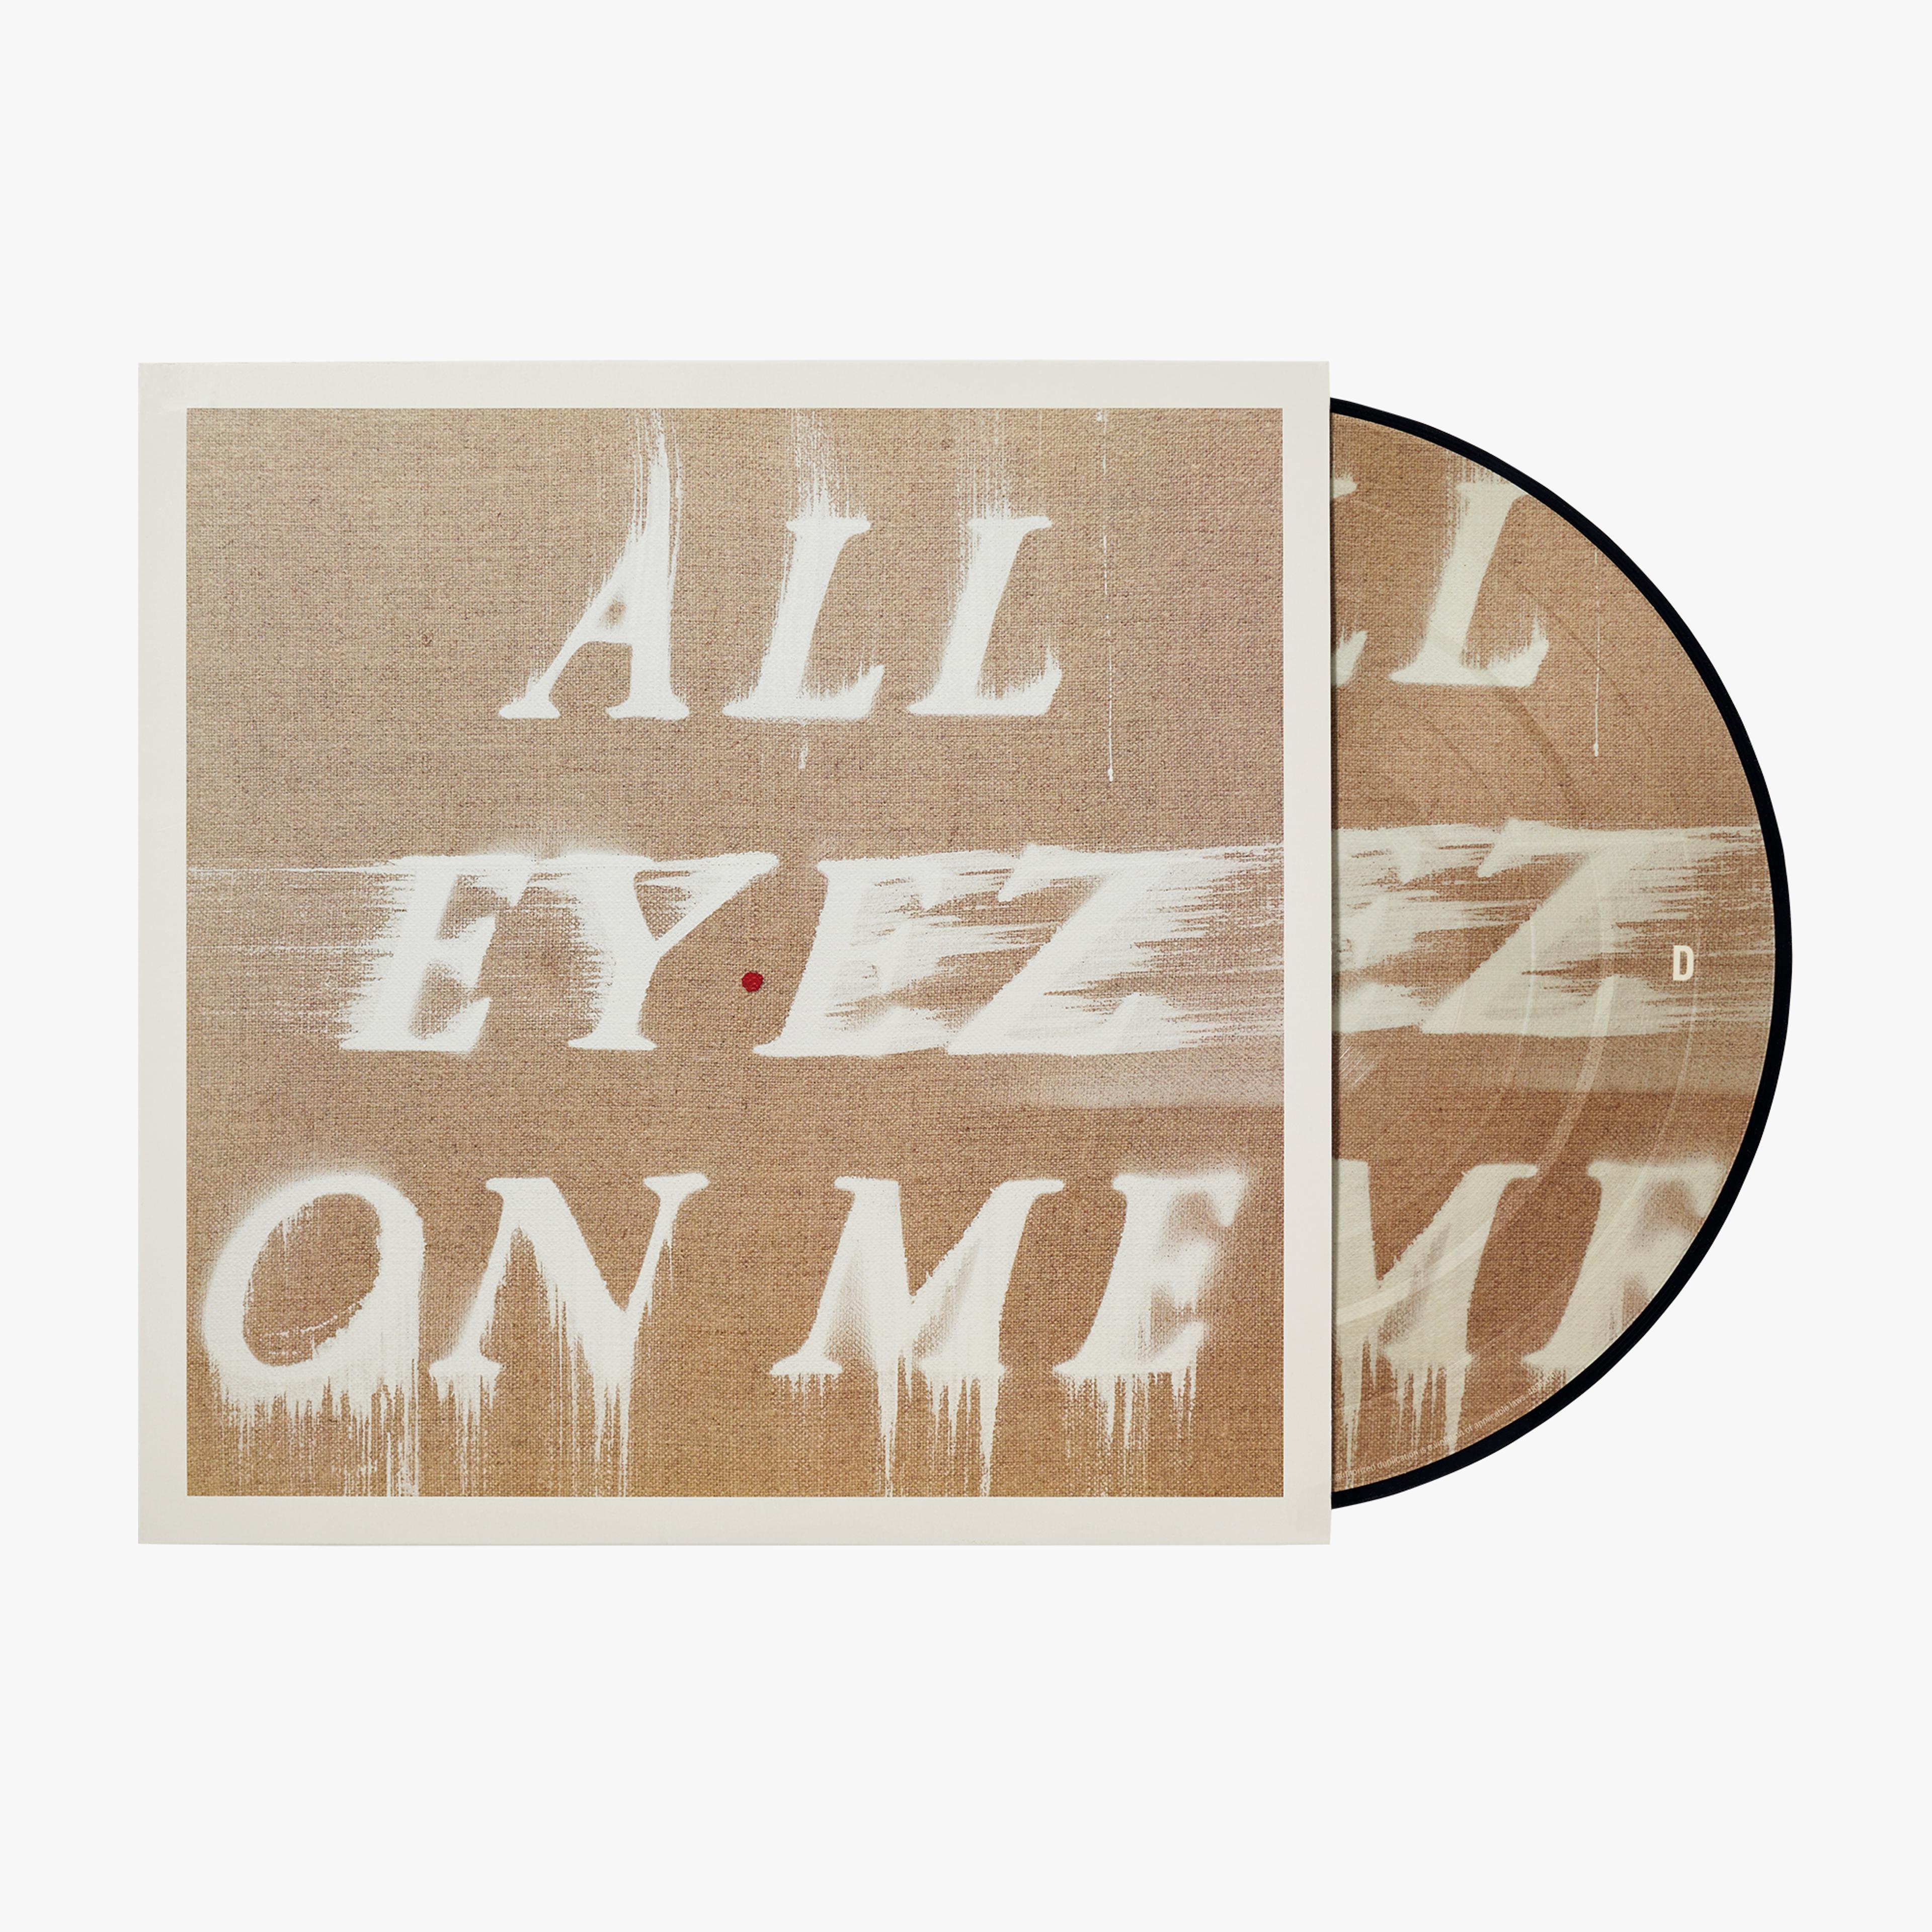 2Pac - All Eyez On Me by Ed Ruscha Gallery Picture Disc